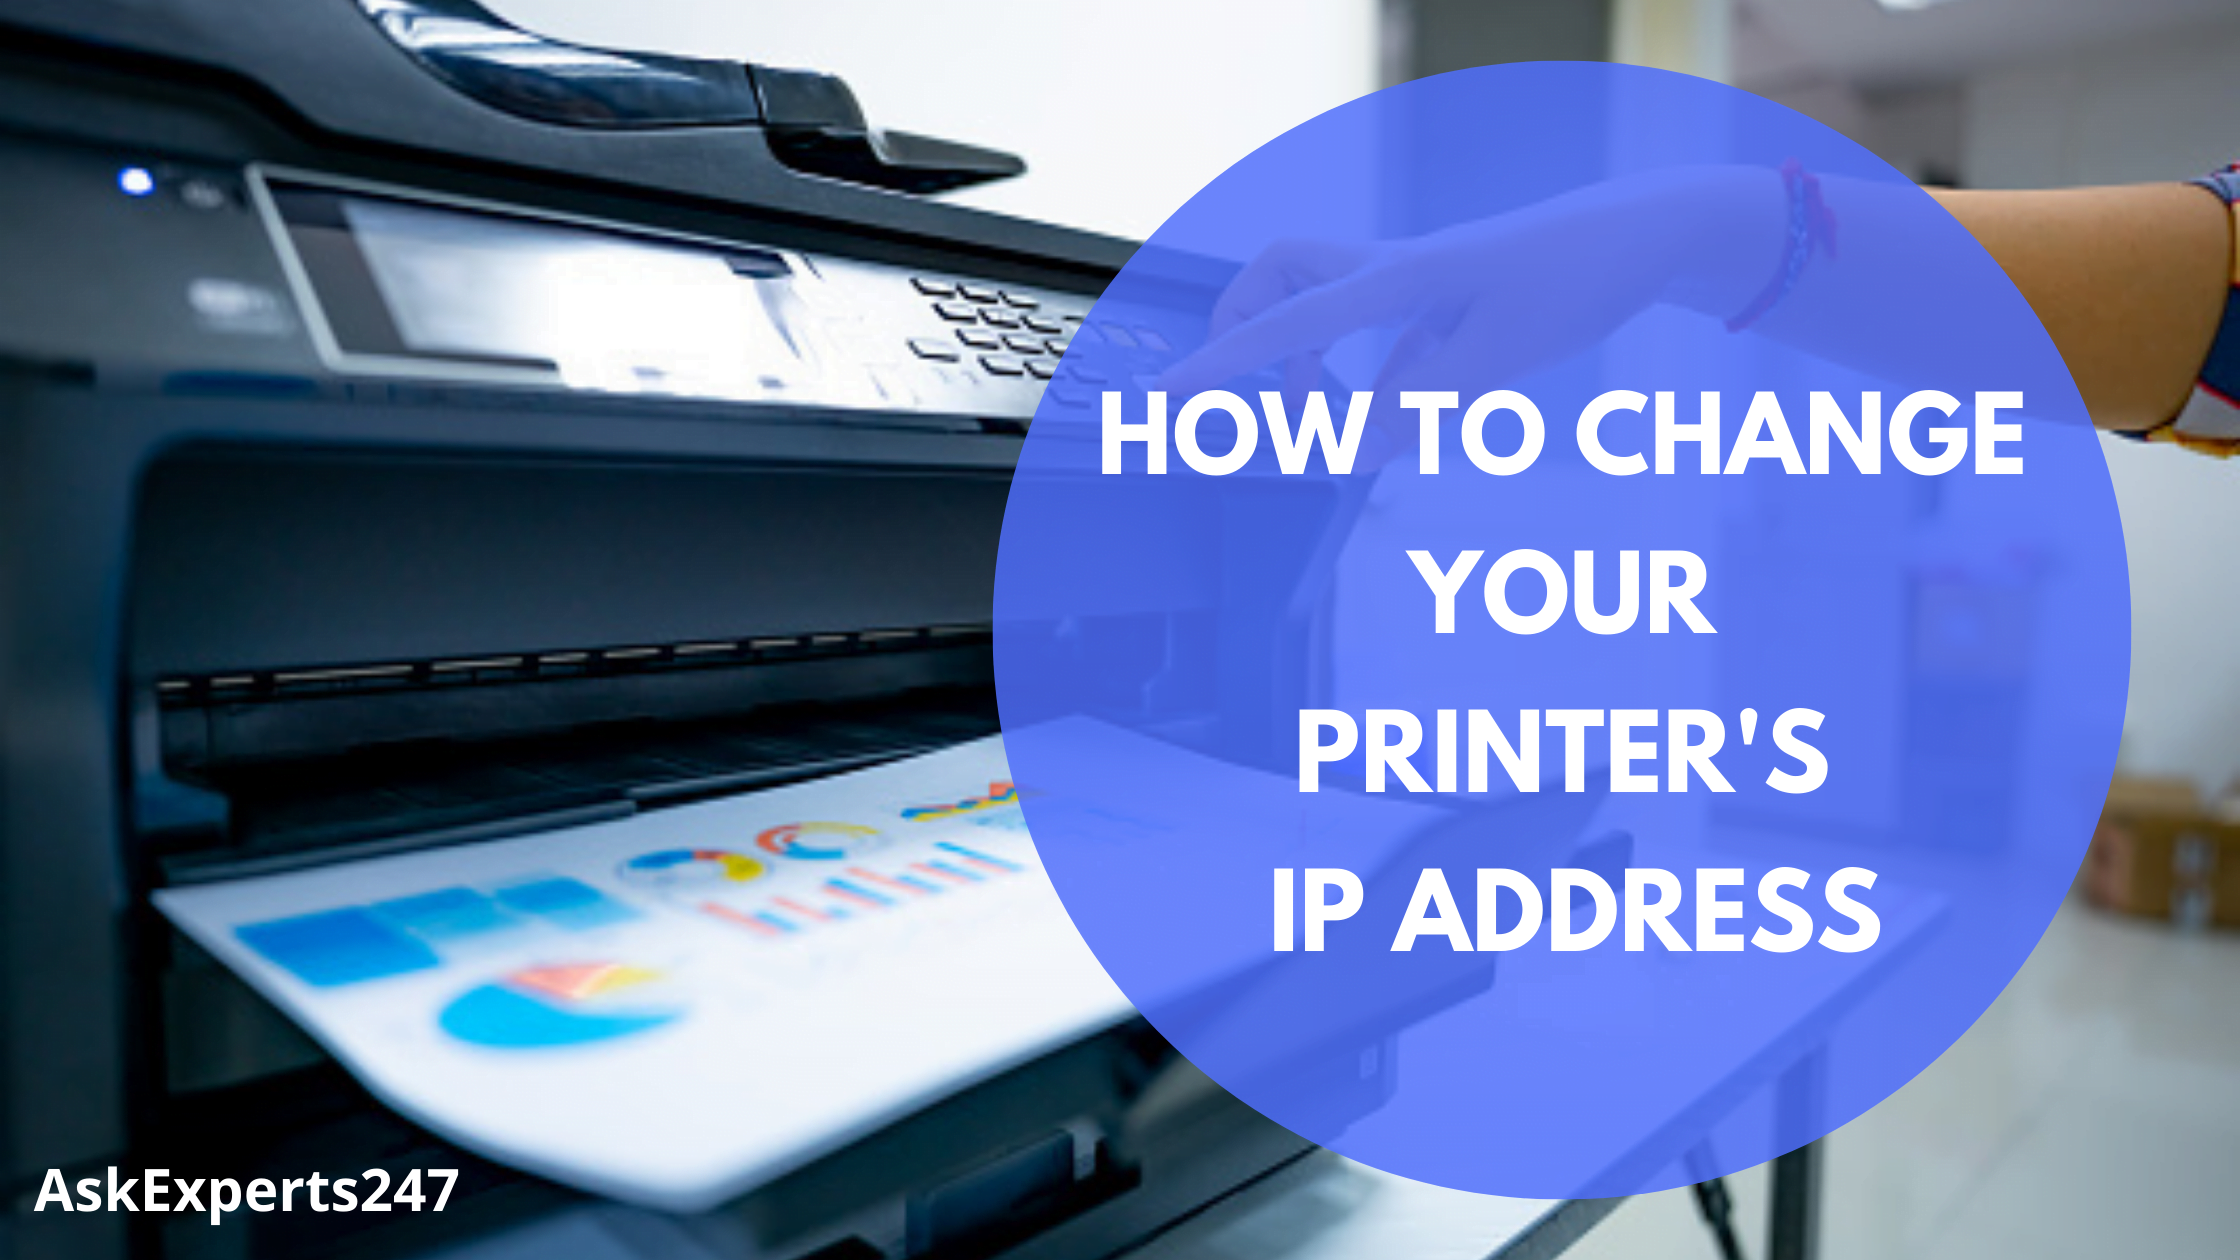 How to change your printer's ip address - Ask Experts 247